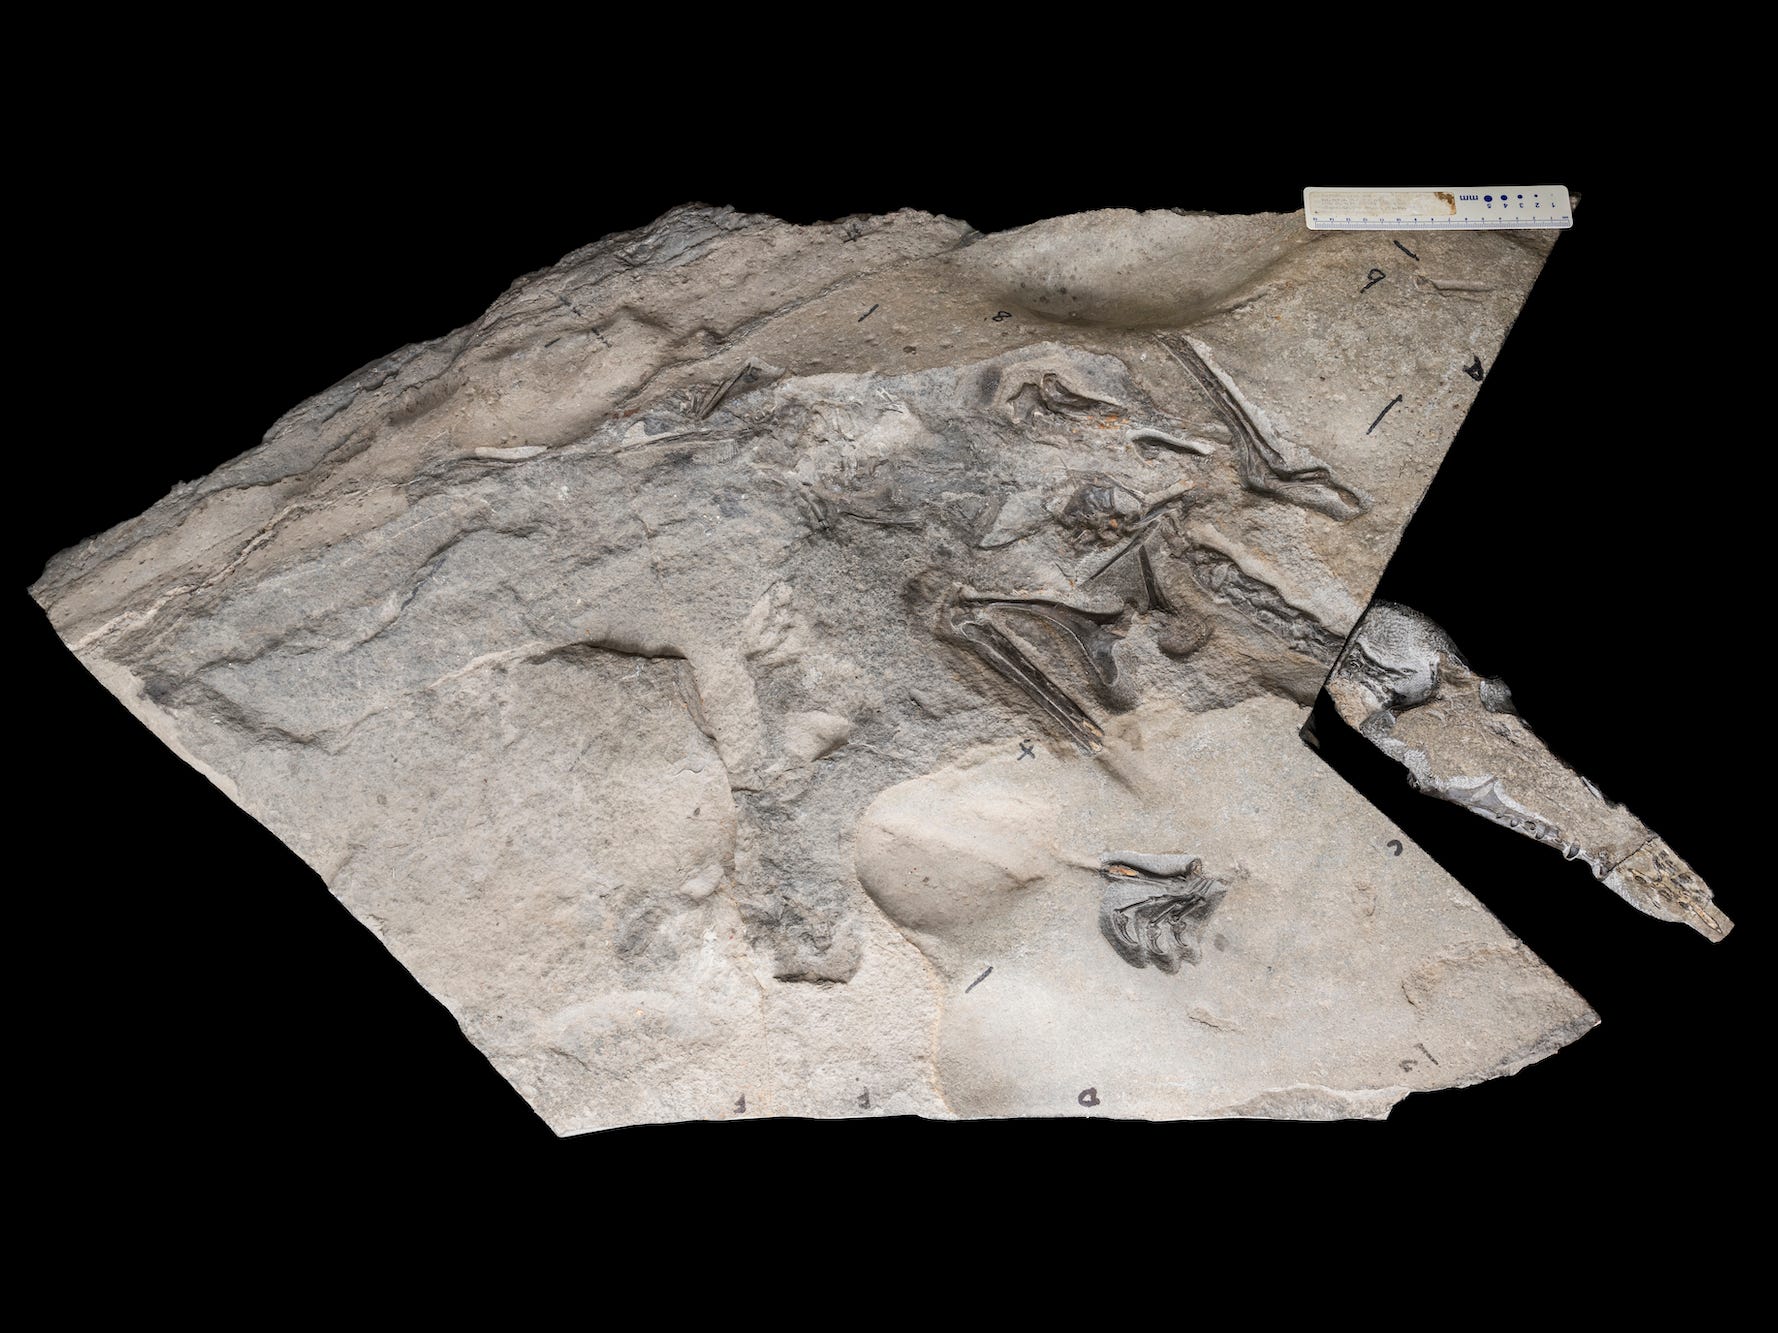 The skeleton of the pterosaurus is seen embeded in the rock.